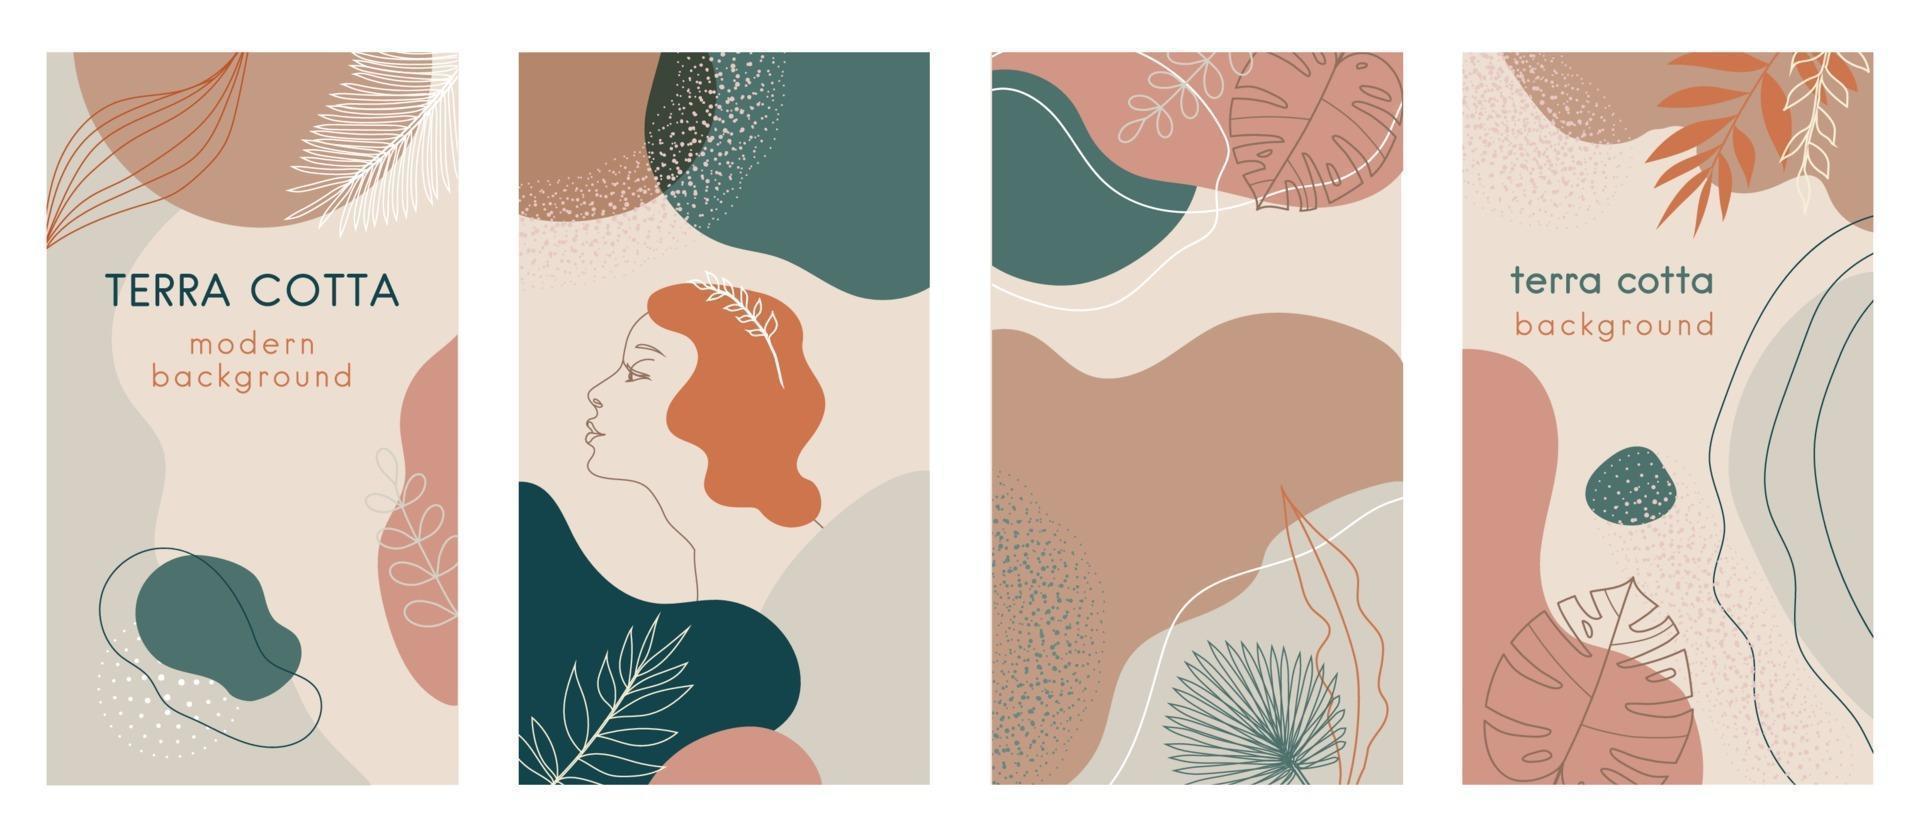 Social media stories set of abstract modern backgrounds with terra cotta pastel color combinations, shapes and tropical palm , monstera leaves, one line women face logo icon. vector